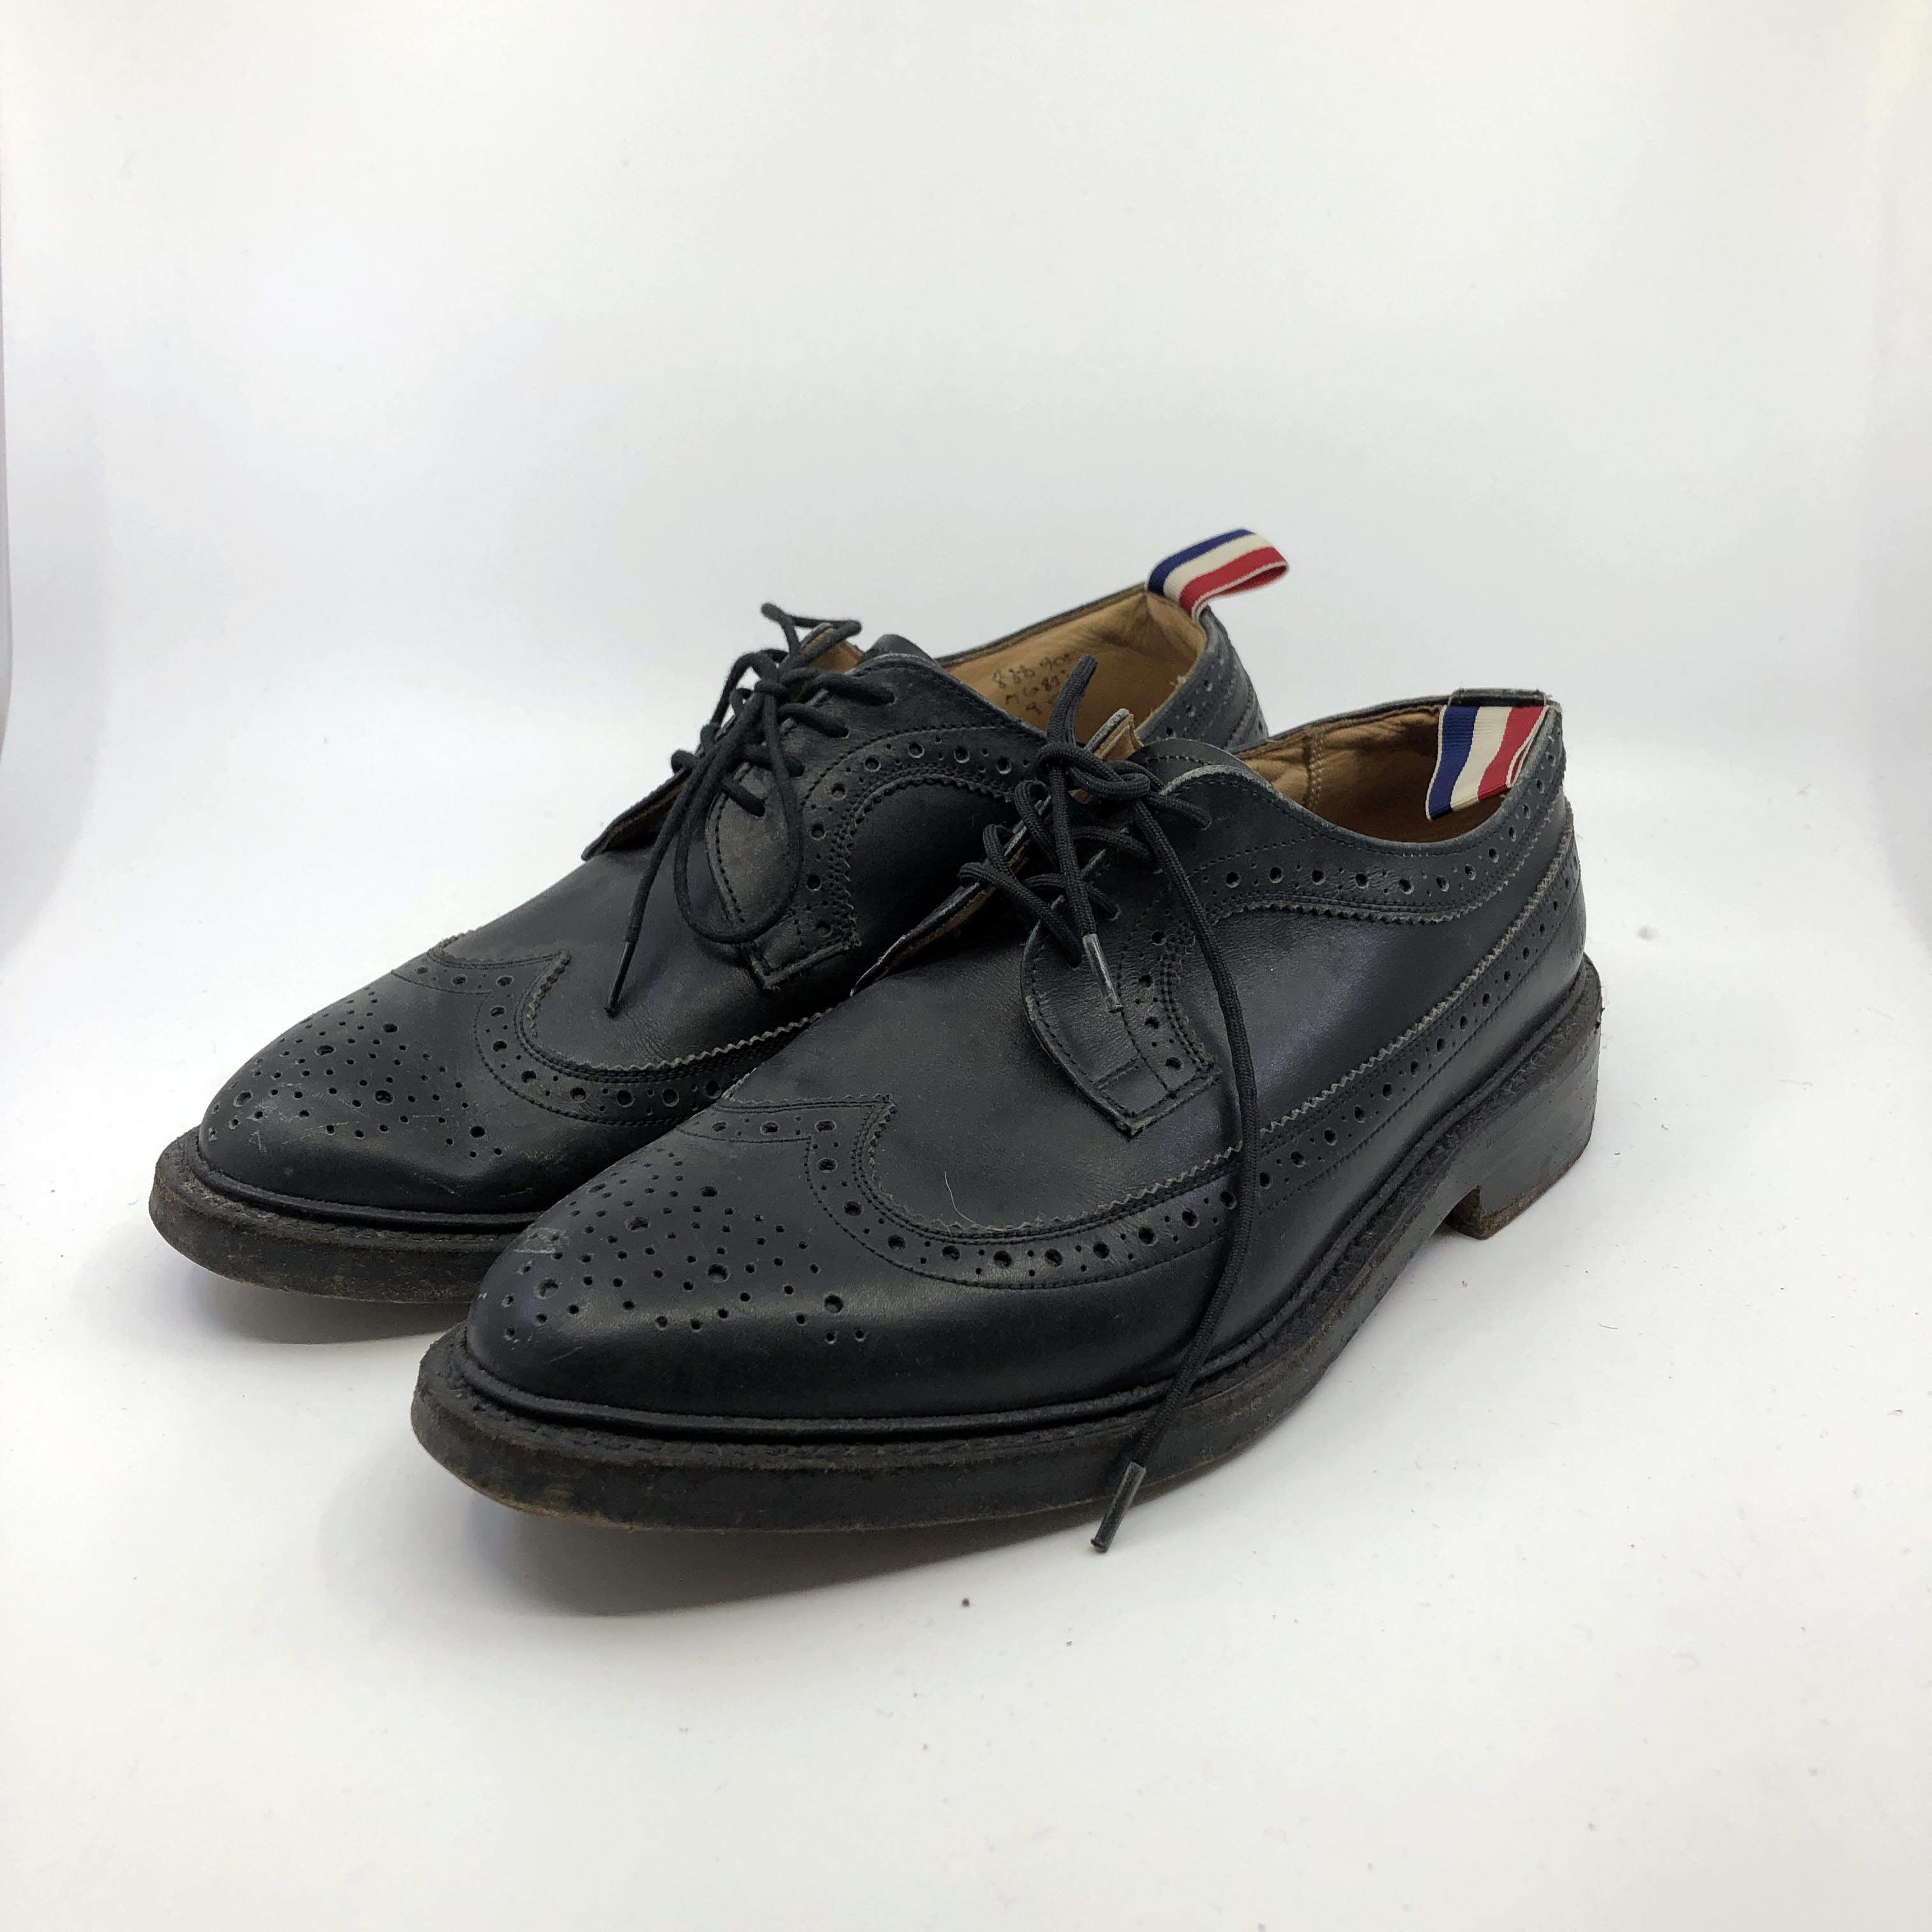 [Thom Browne] Wing Tip Shoes - Size 275